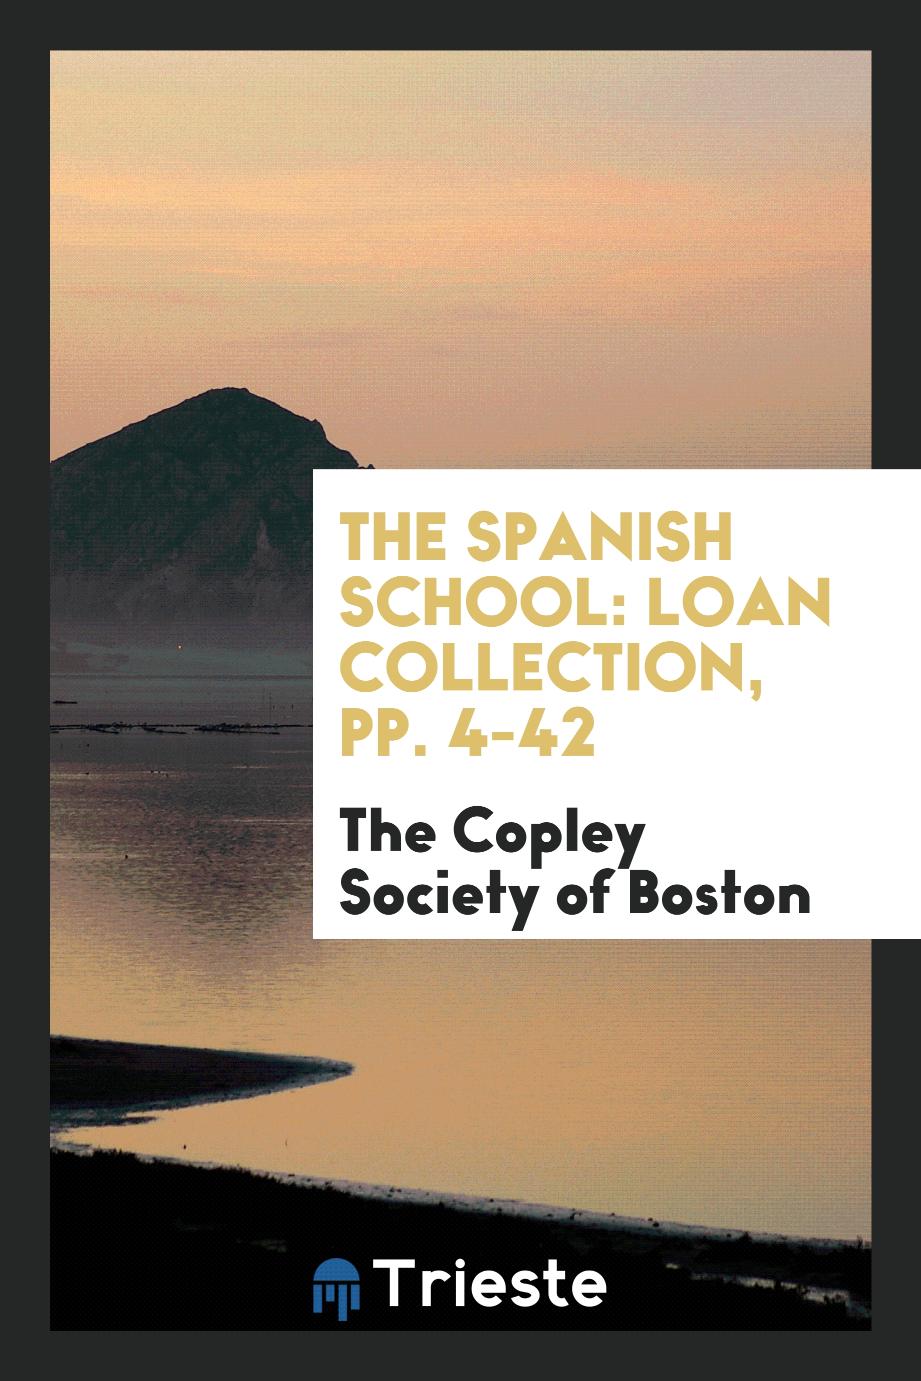 The Spanish School: Loan Collection, pp. 4-42